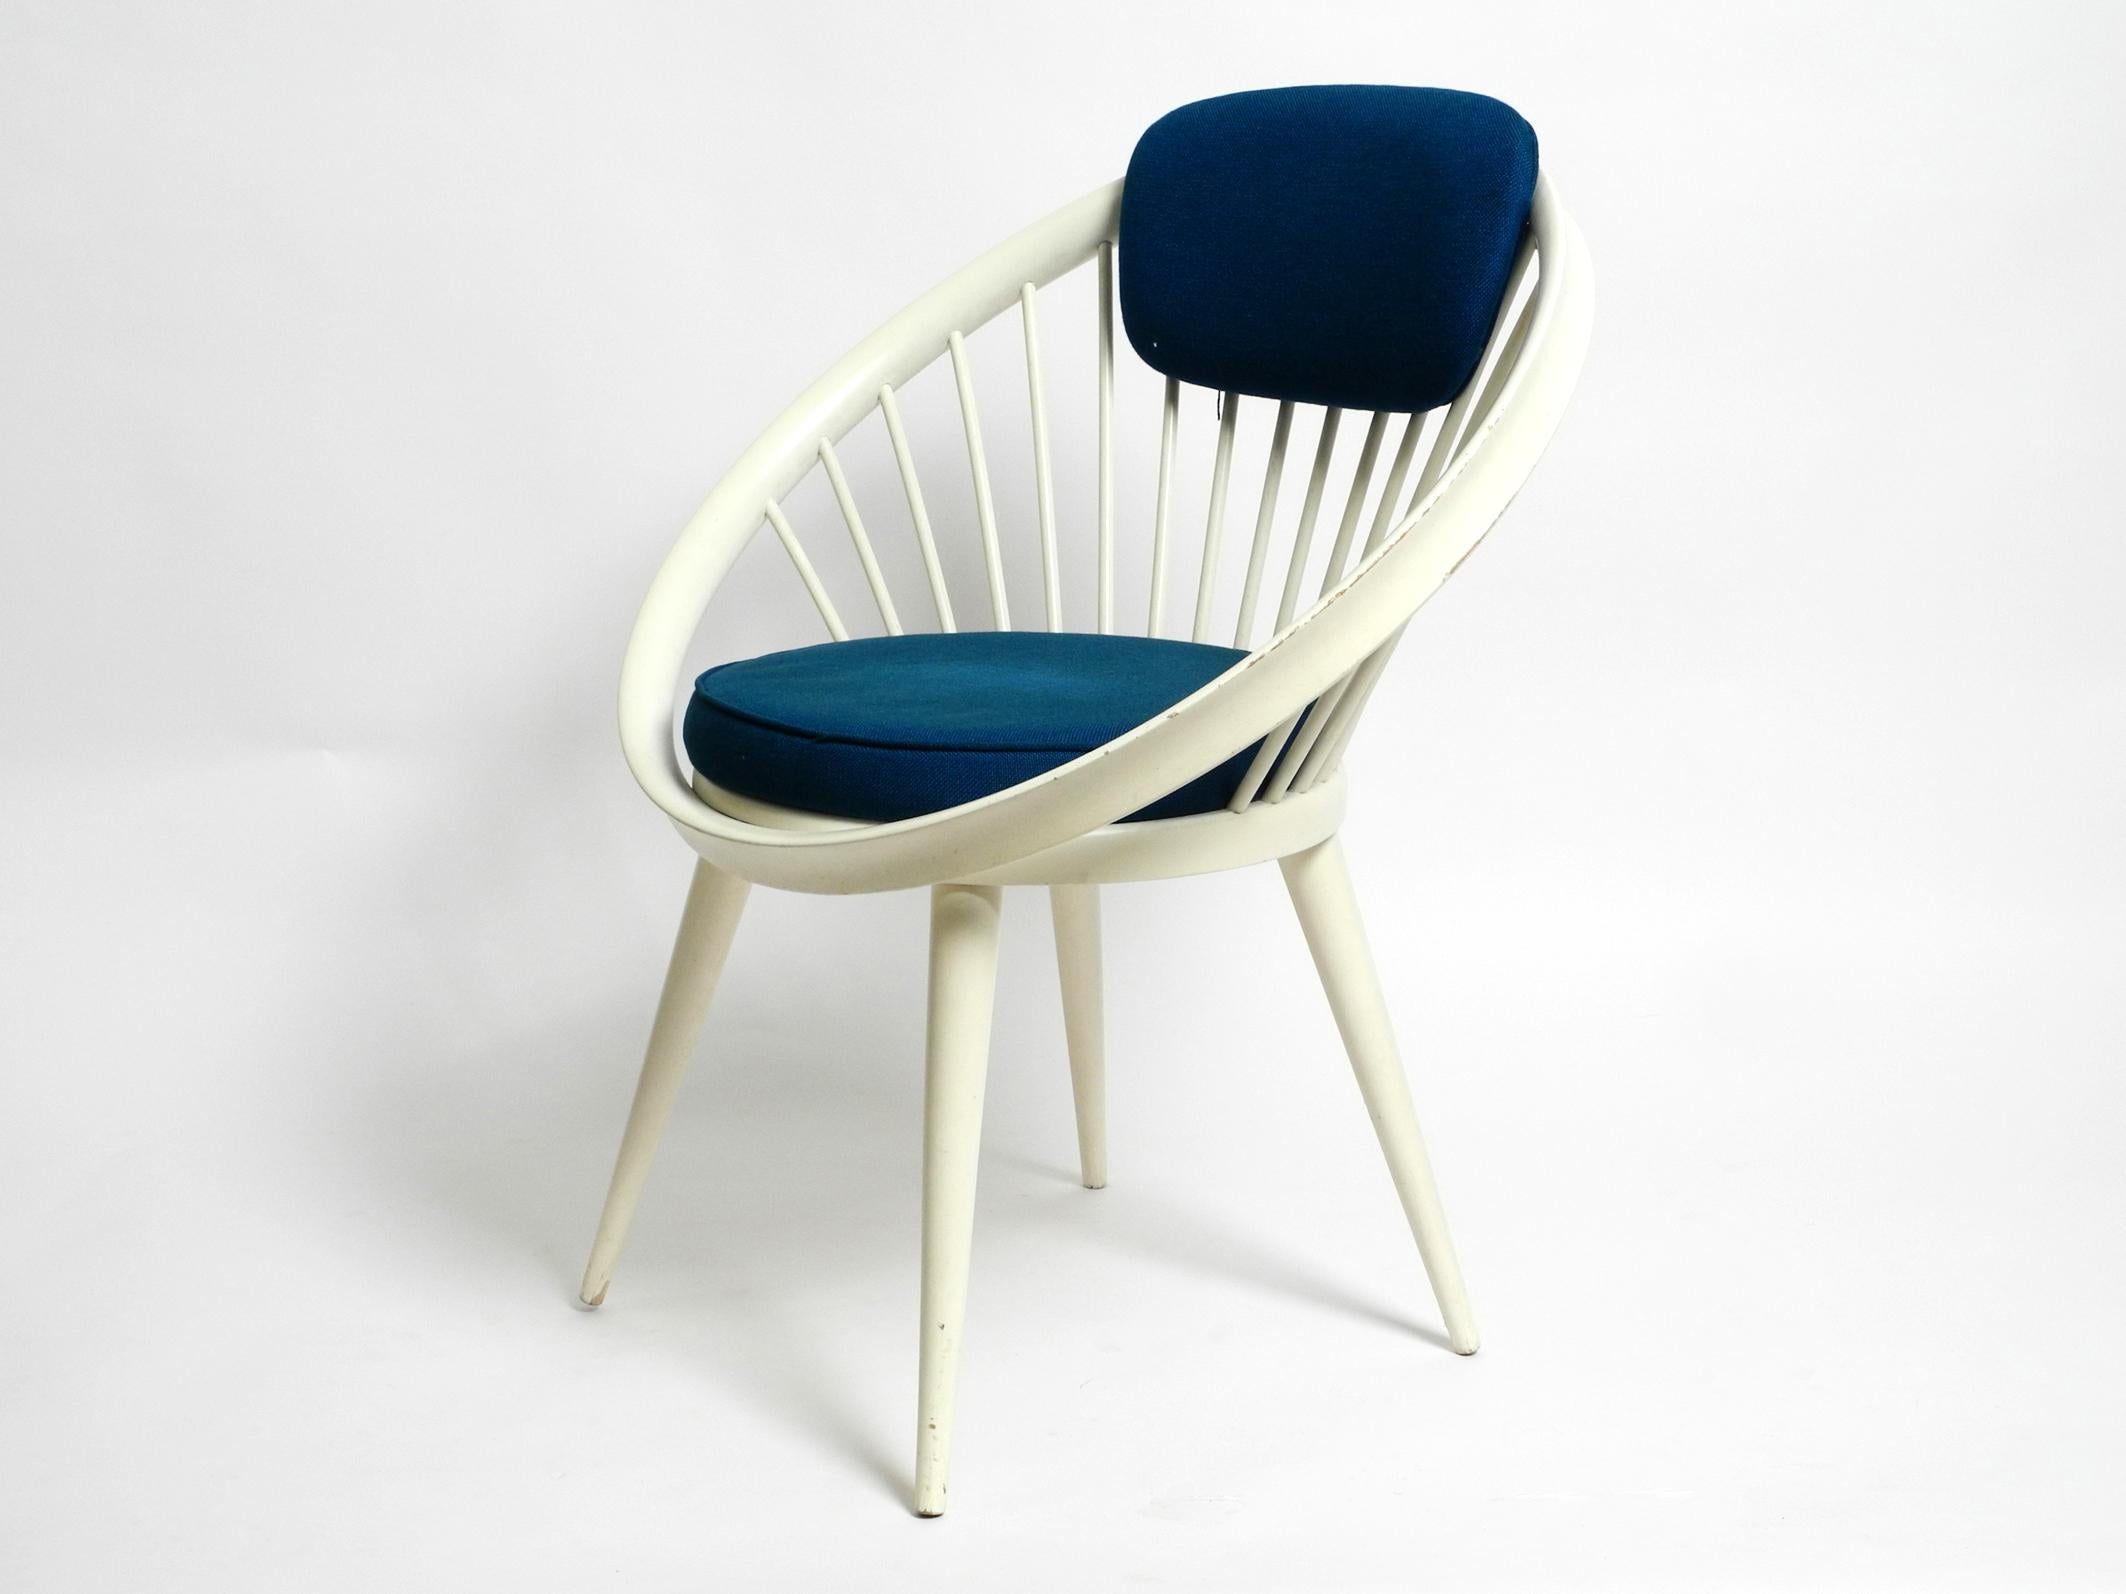 Beautiful rare original 1950s Circle Chair by Yngve Ekström for Swedese. Made in Sweden.
Solid wood frame painted white with original upholstery in dark blue.
Very nice, typical Scandinavian Mid Century design, super comfortable and very